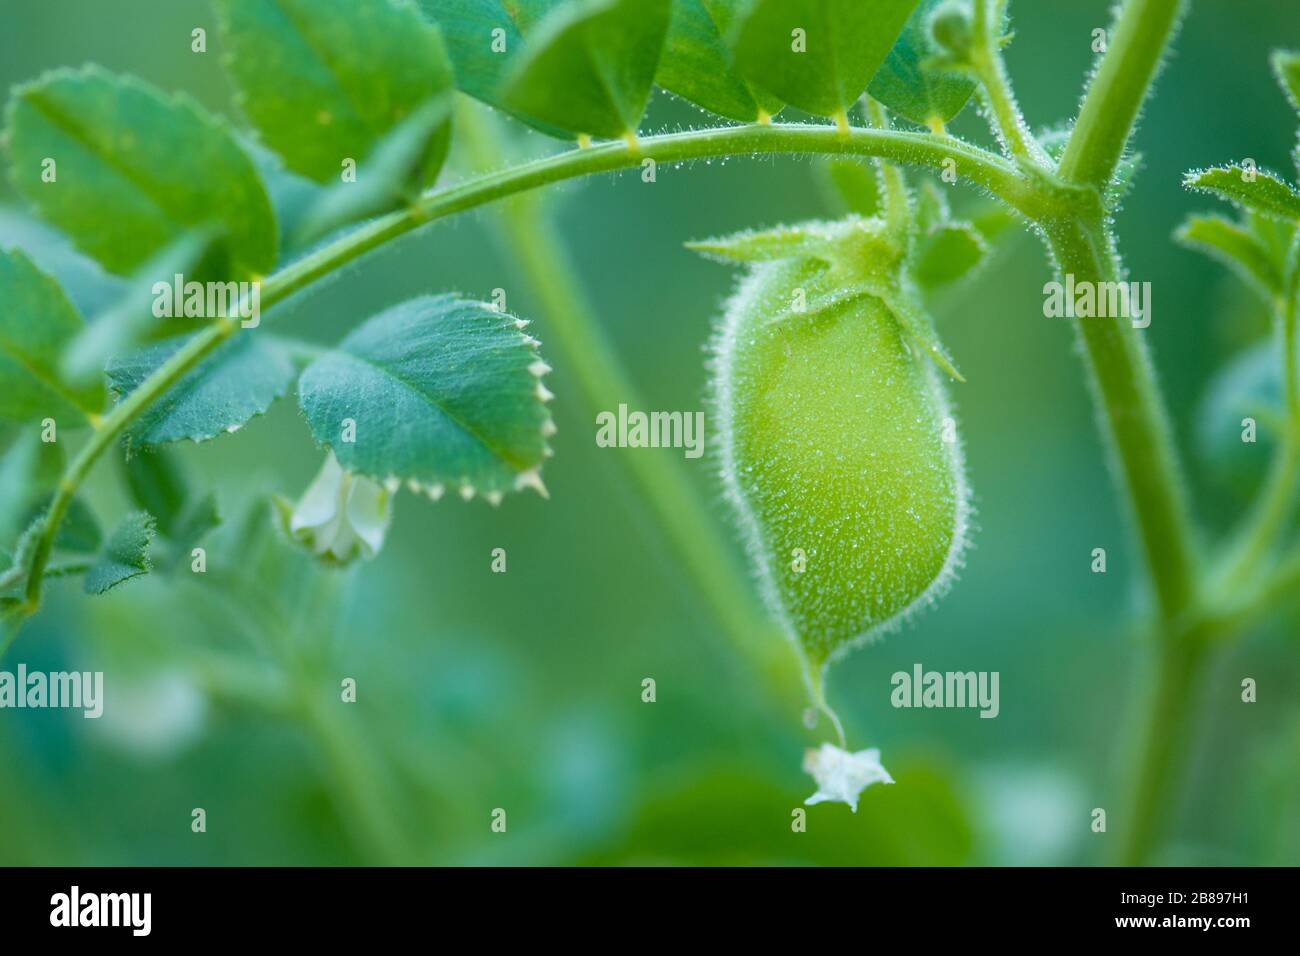 Chickpeas green on plant. Green chickpeas field. Cicer arietinum green pods on eco nature green defocused background Stock Photo